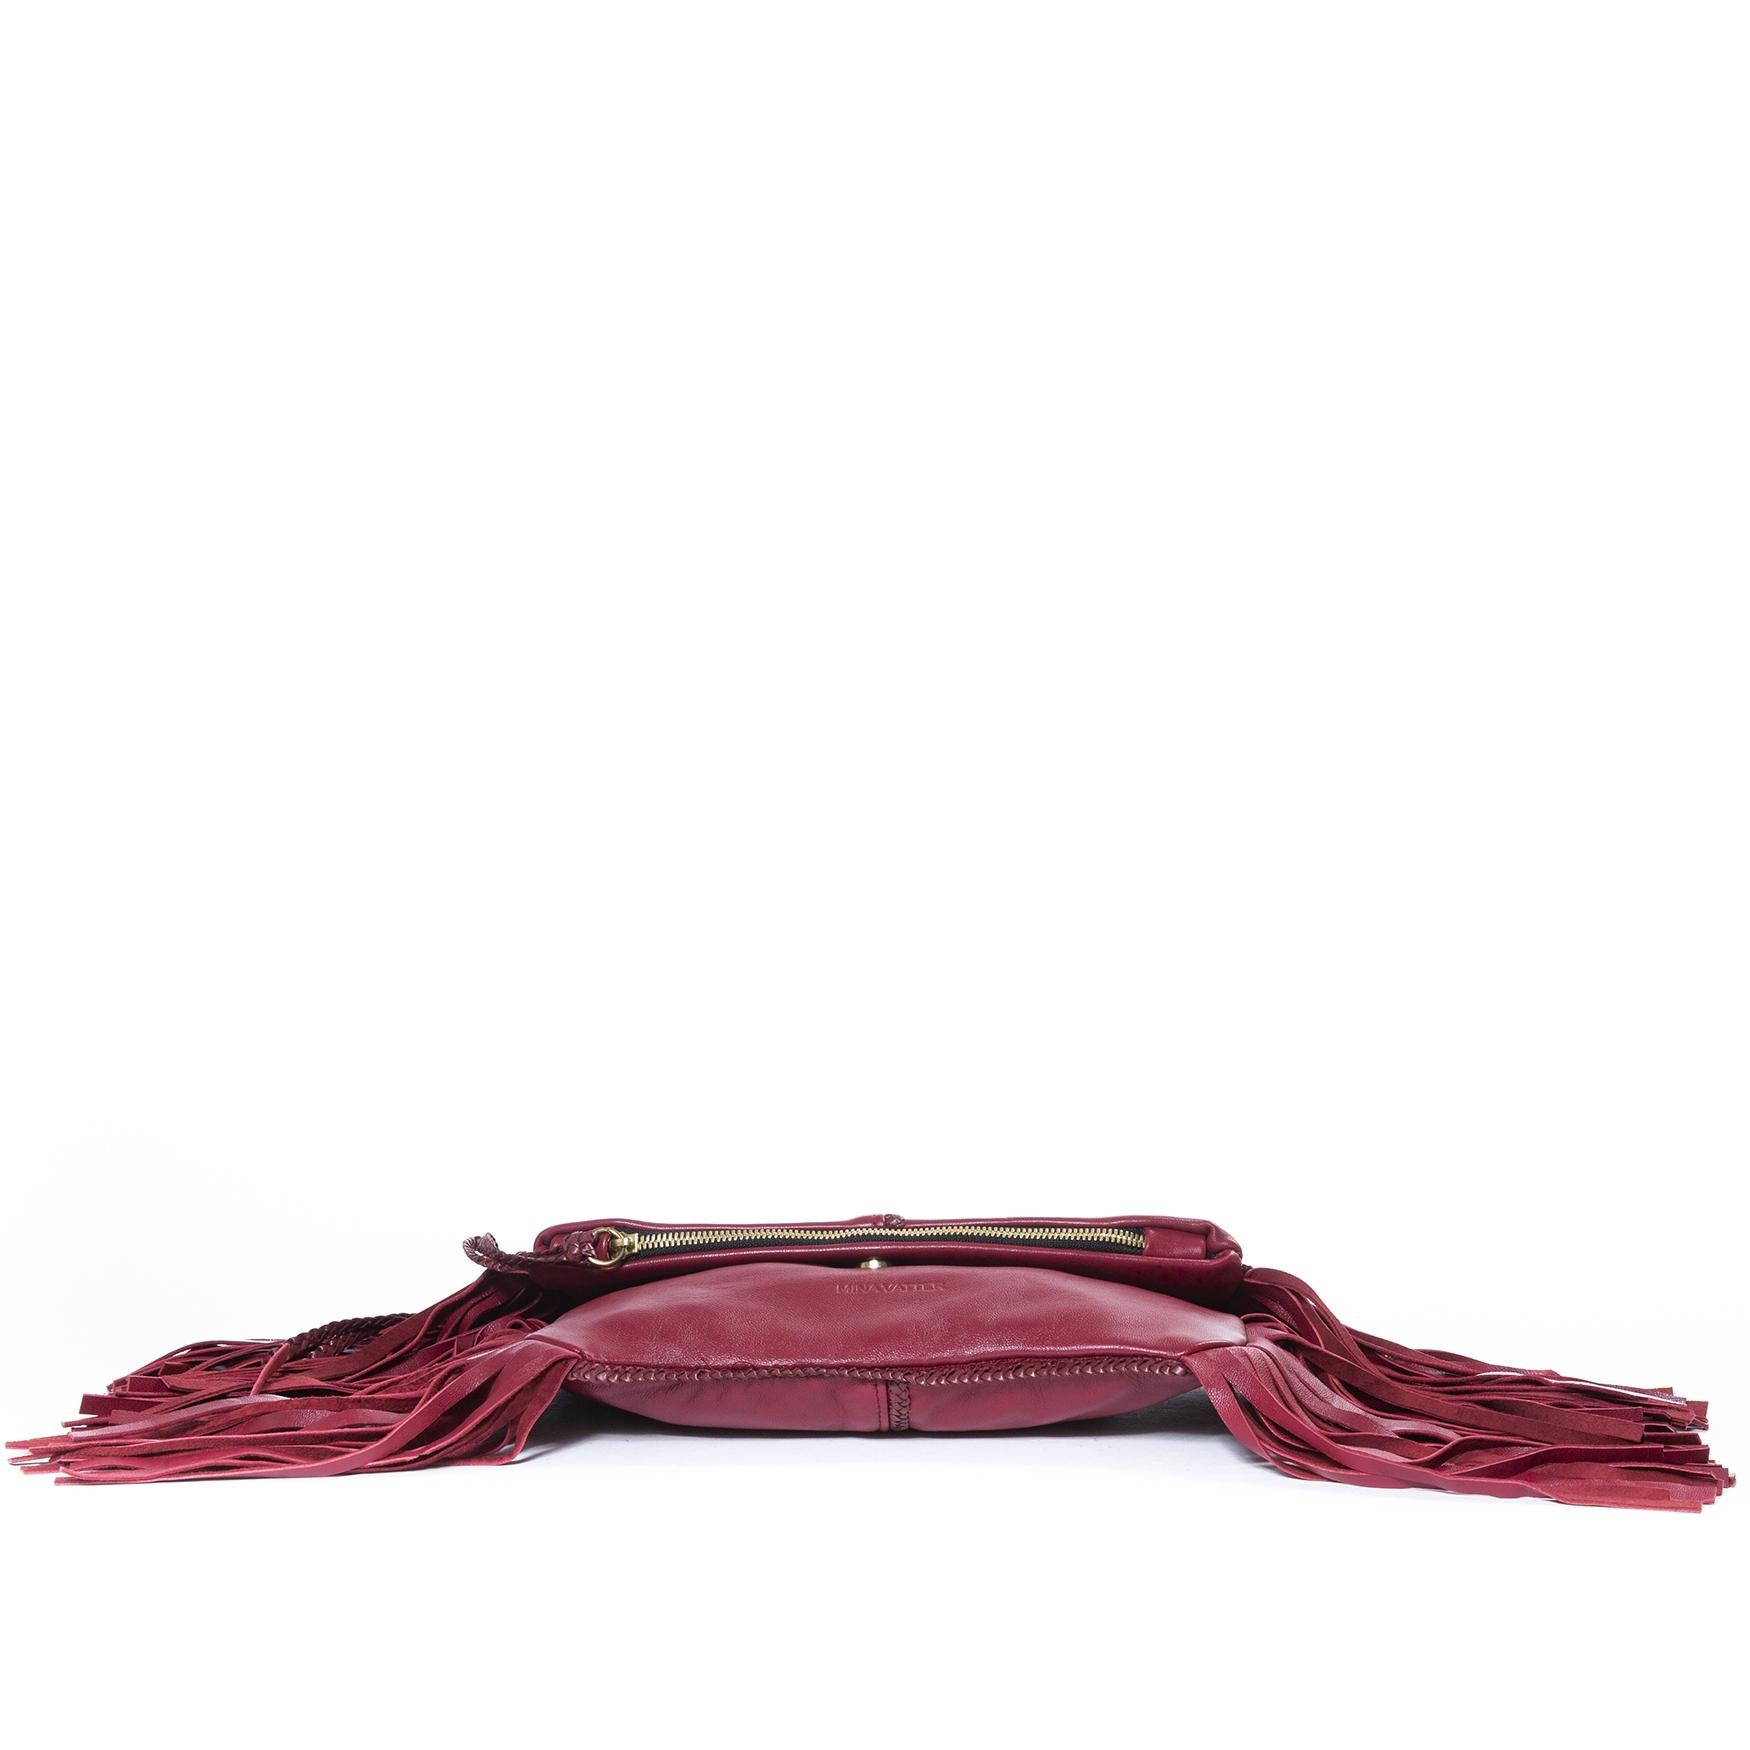 Mina Vatter Red Leather Fringe Clutch In Excellent Condition For Sale In Antwerp, BE